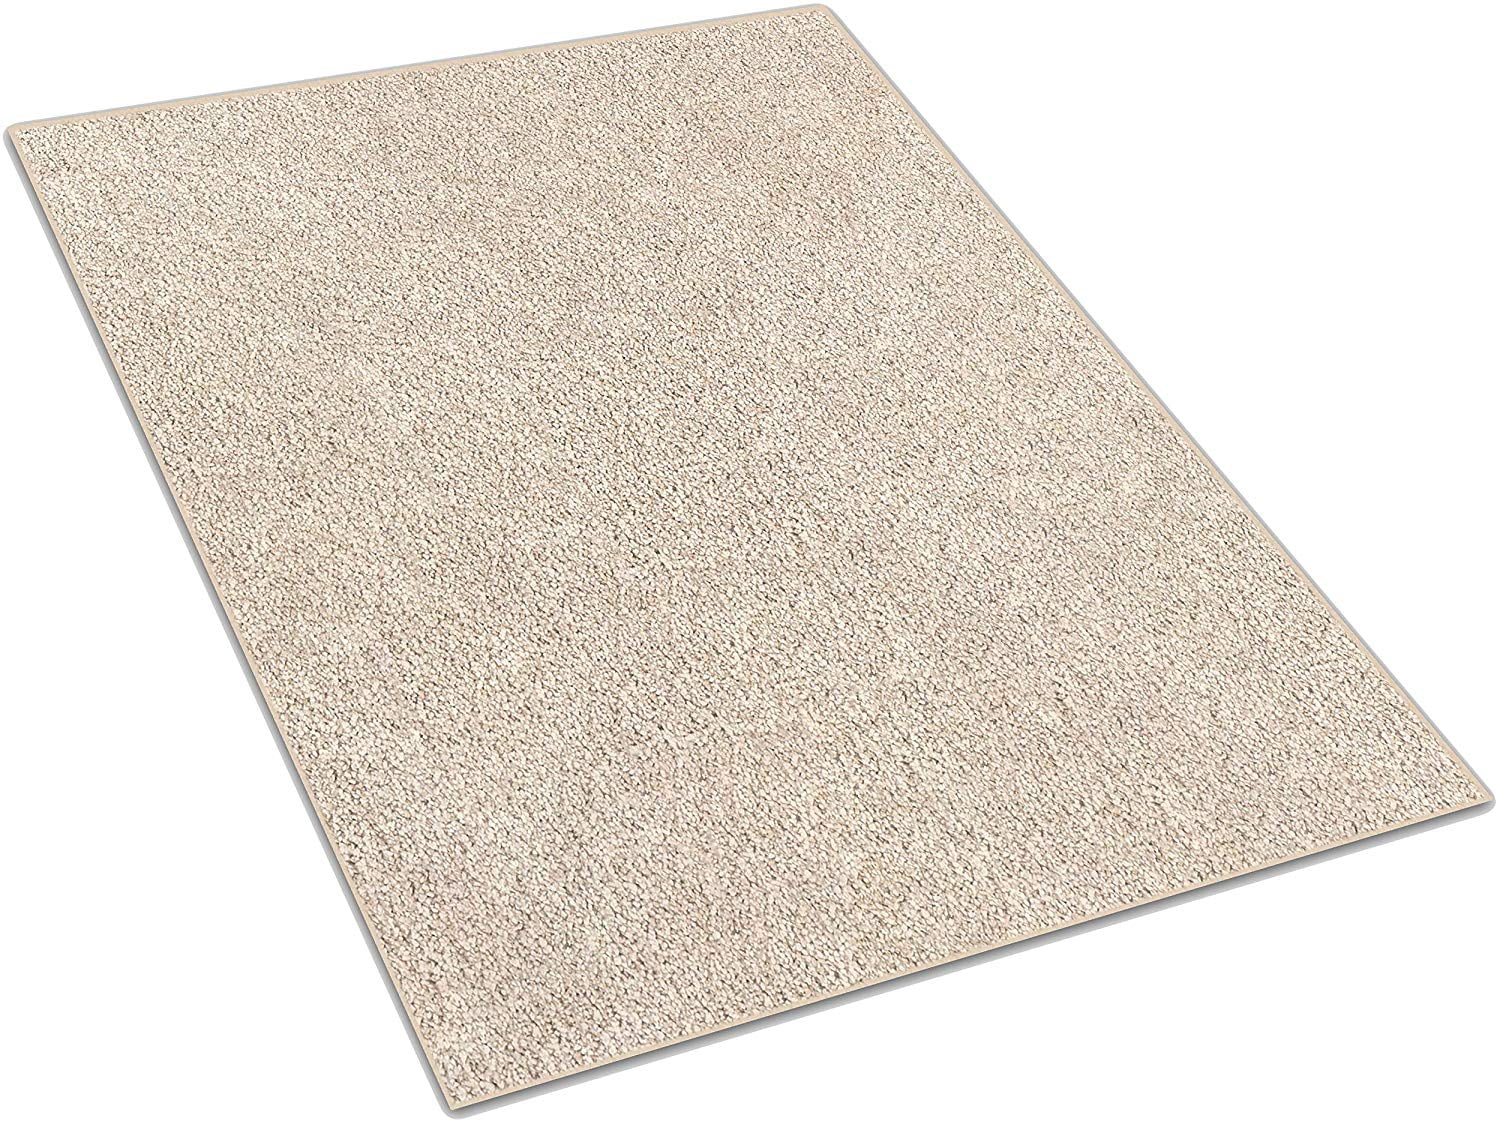 Caramel Pop Area Rug Soft Cozy Stain Resistant Fibers Safe for Kids and Pets 